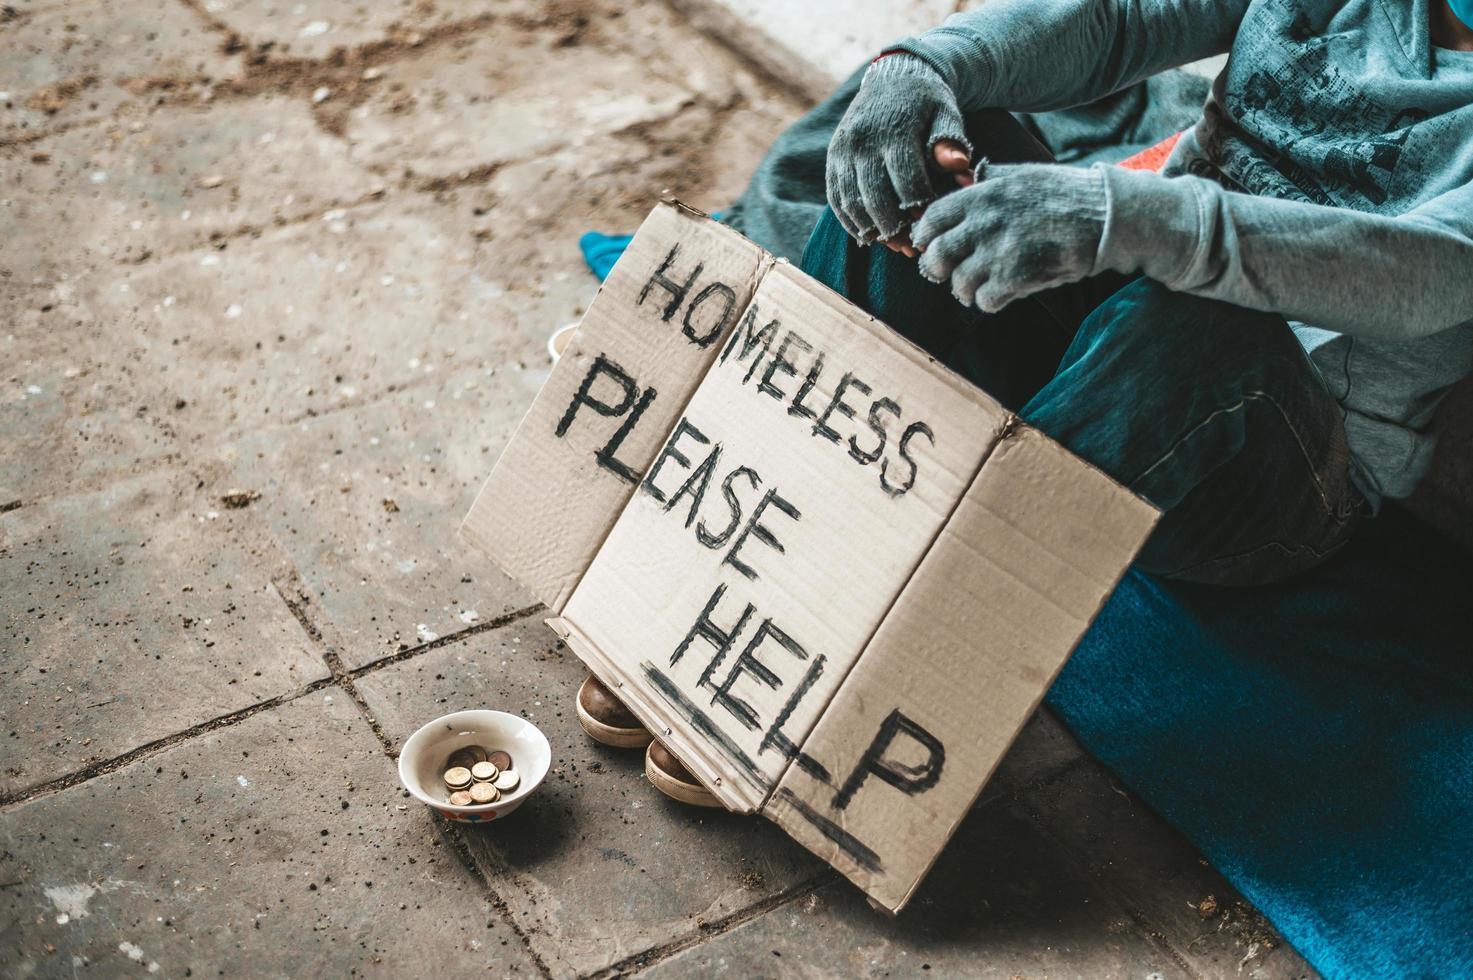 Man sits beside the street with a homeless message photo